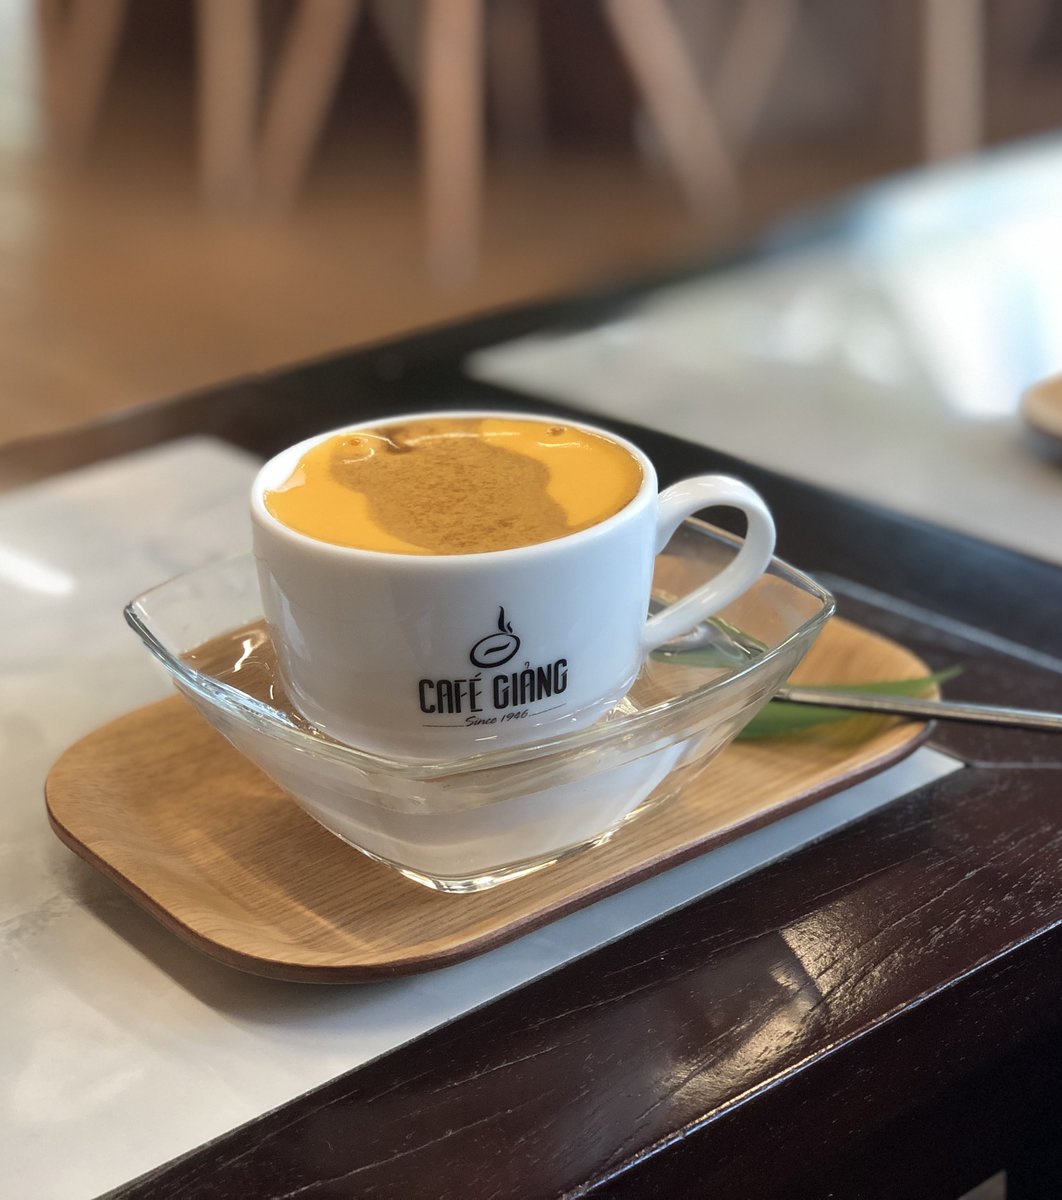 CAFE GIANG（カフェ ジャン）